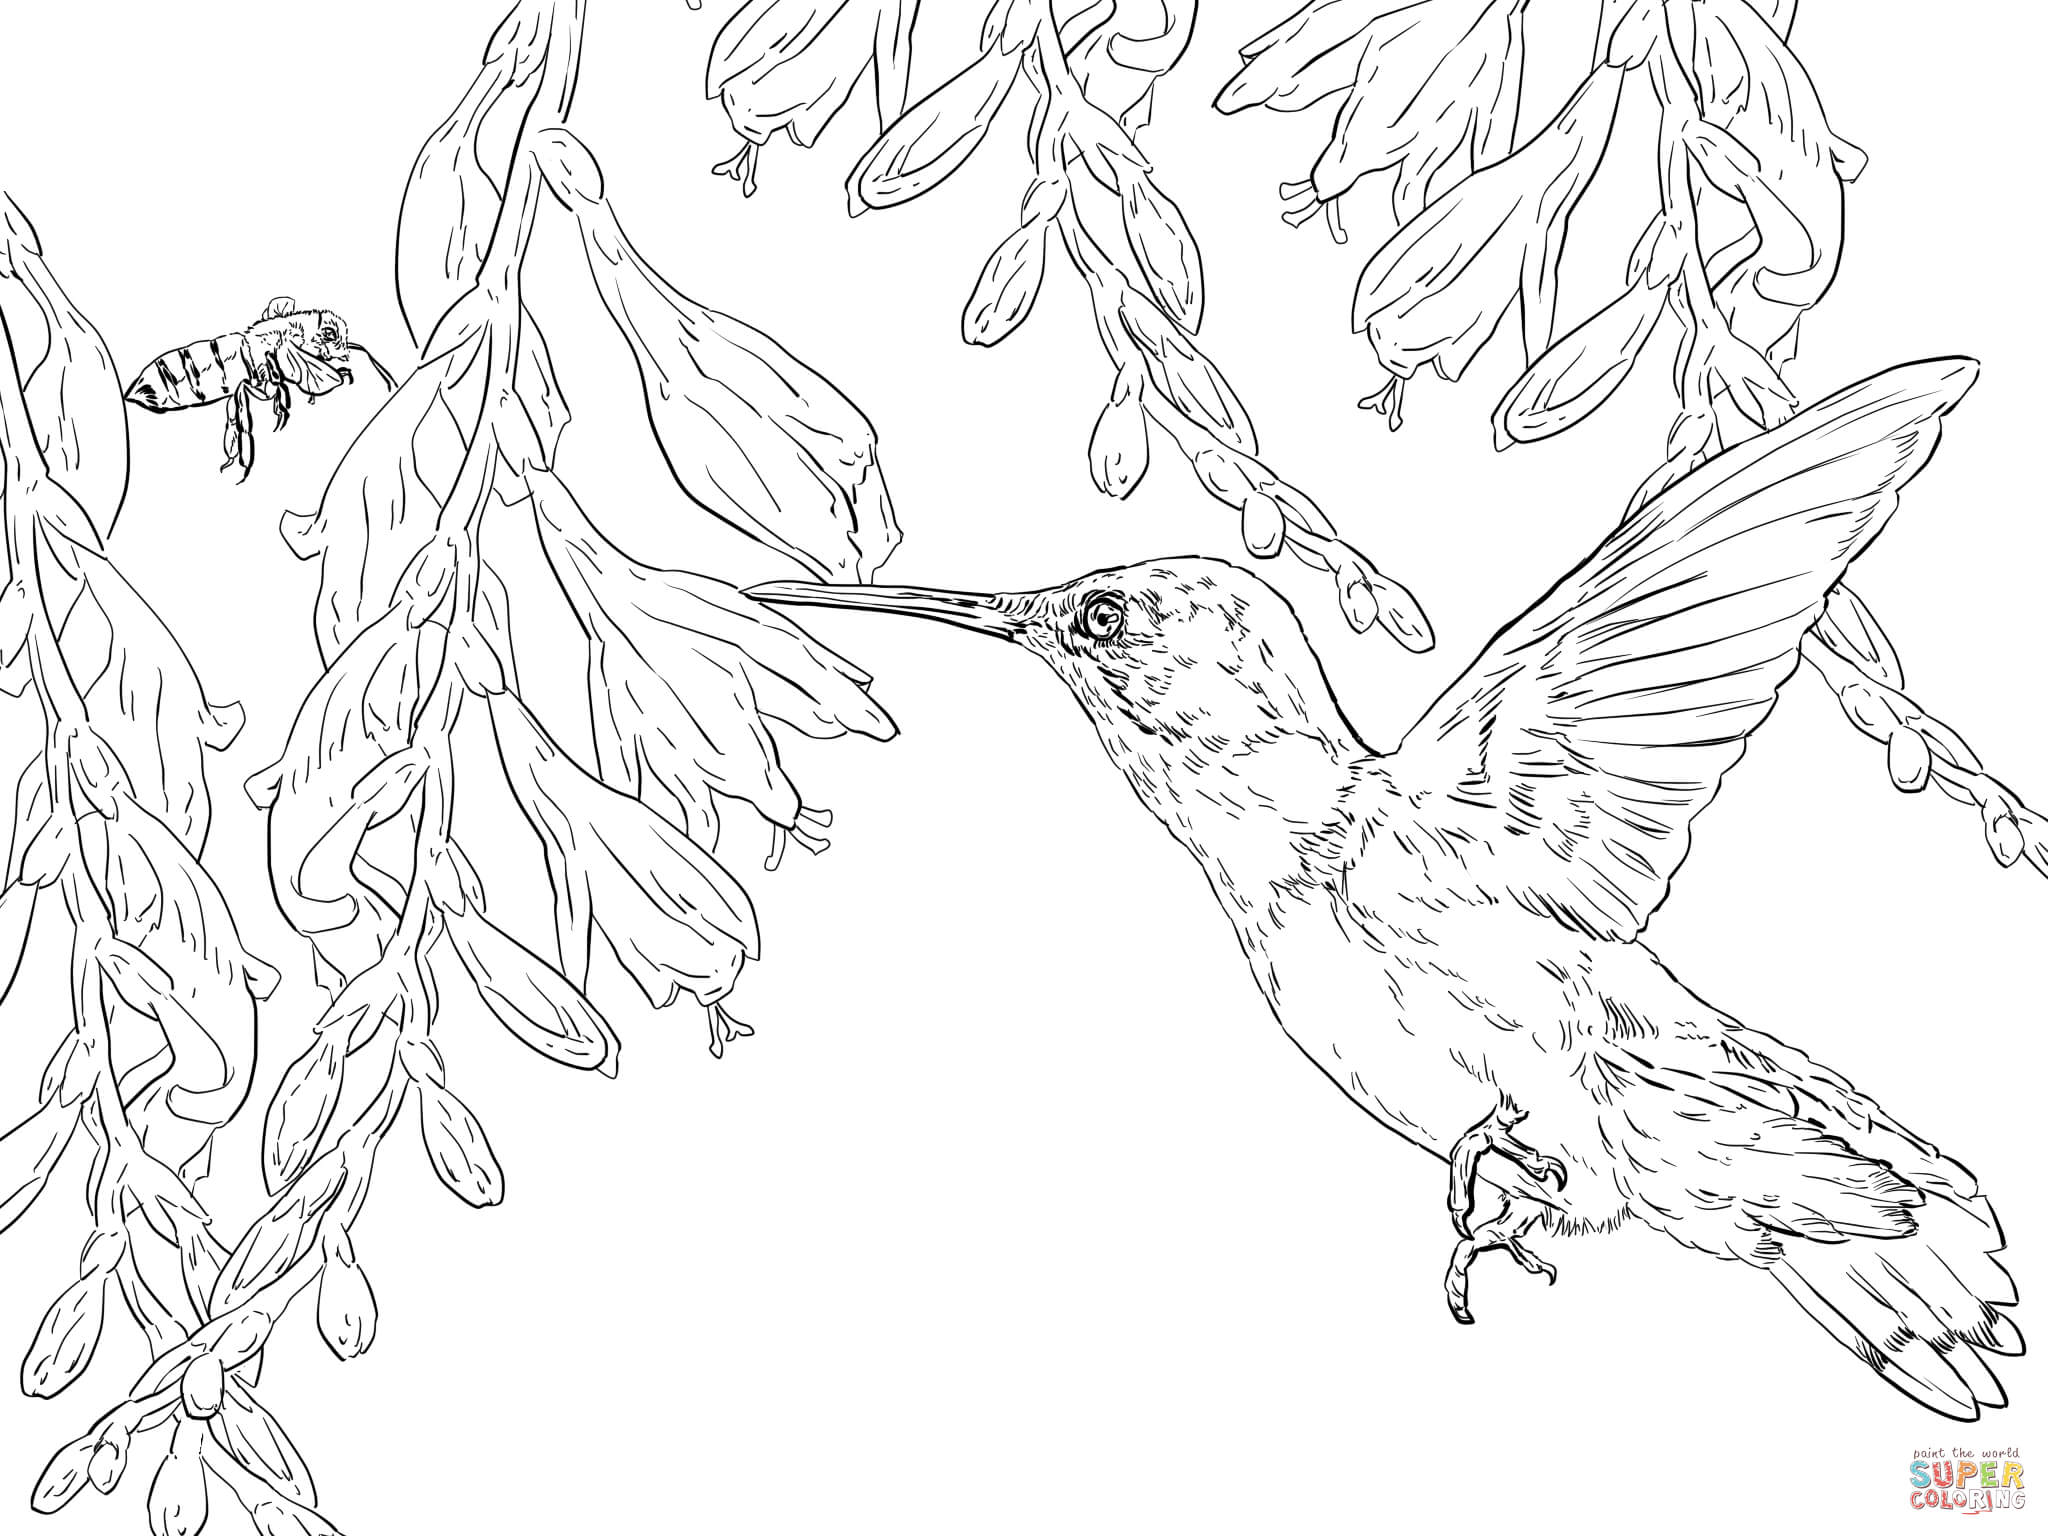 Bee Hummingbird coloring page | Free Printable Coloring Pages